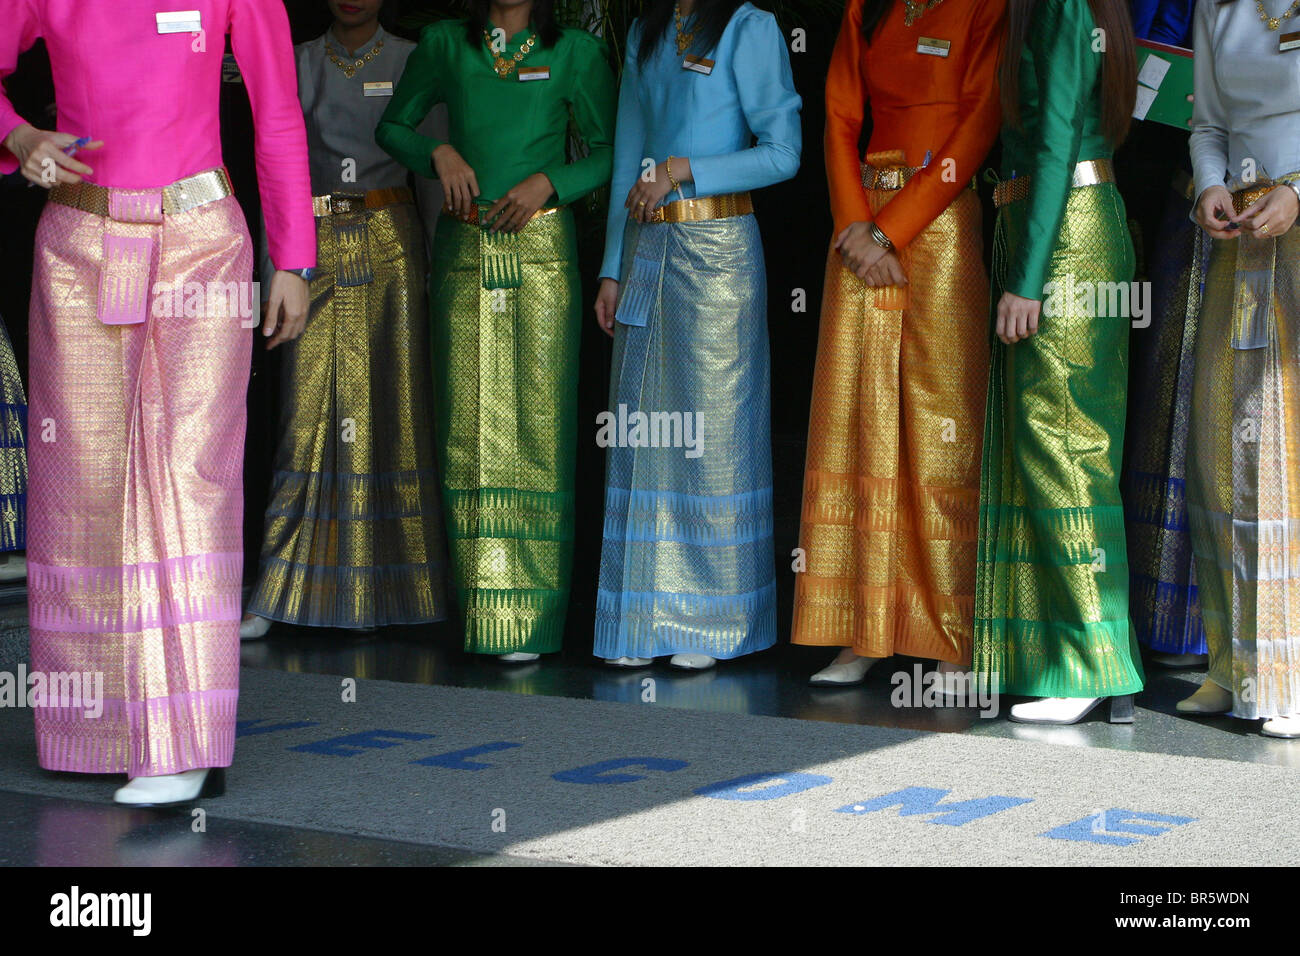 A group of welcoming ladies wearing sarongs at a Gold and Gem factory outlet in Bangkok, Thailand. Stock Photo